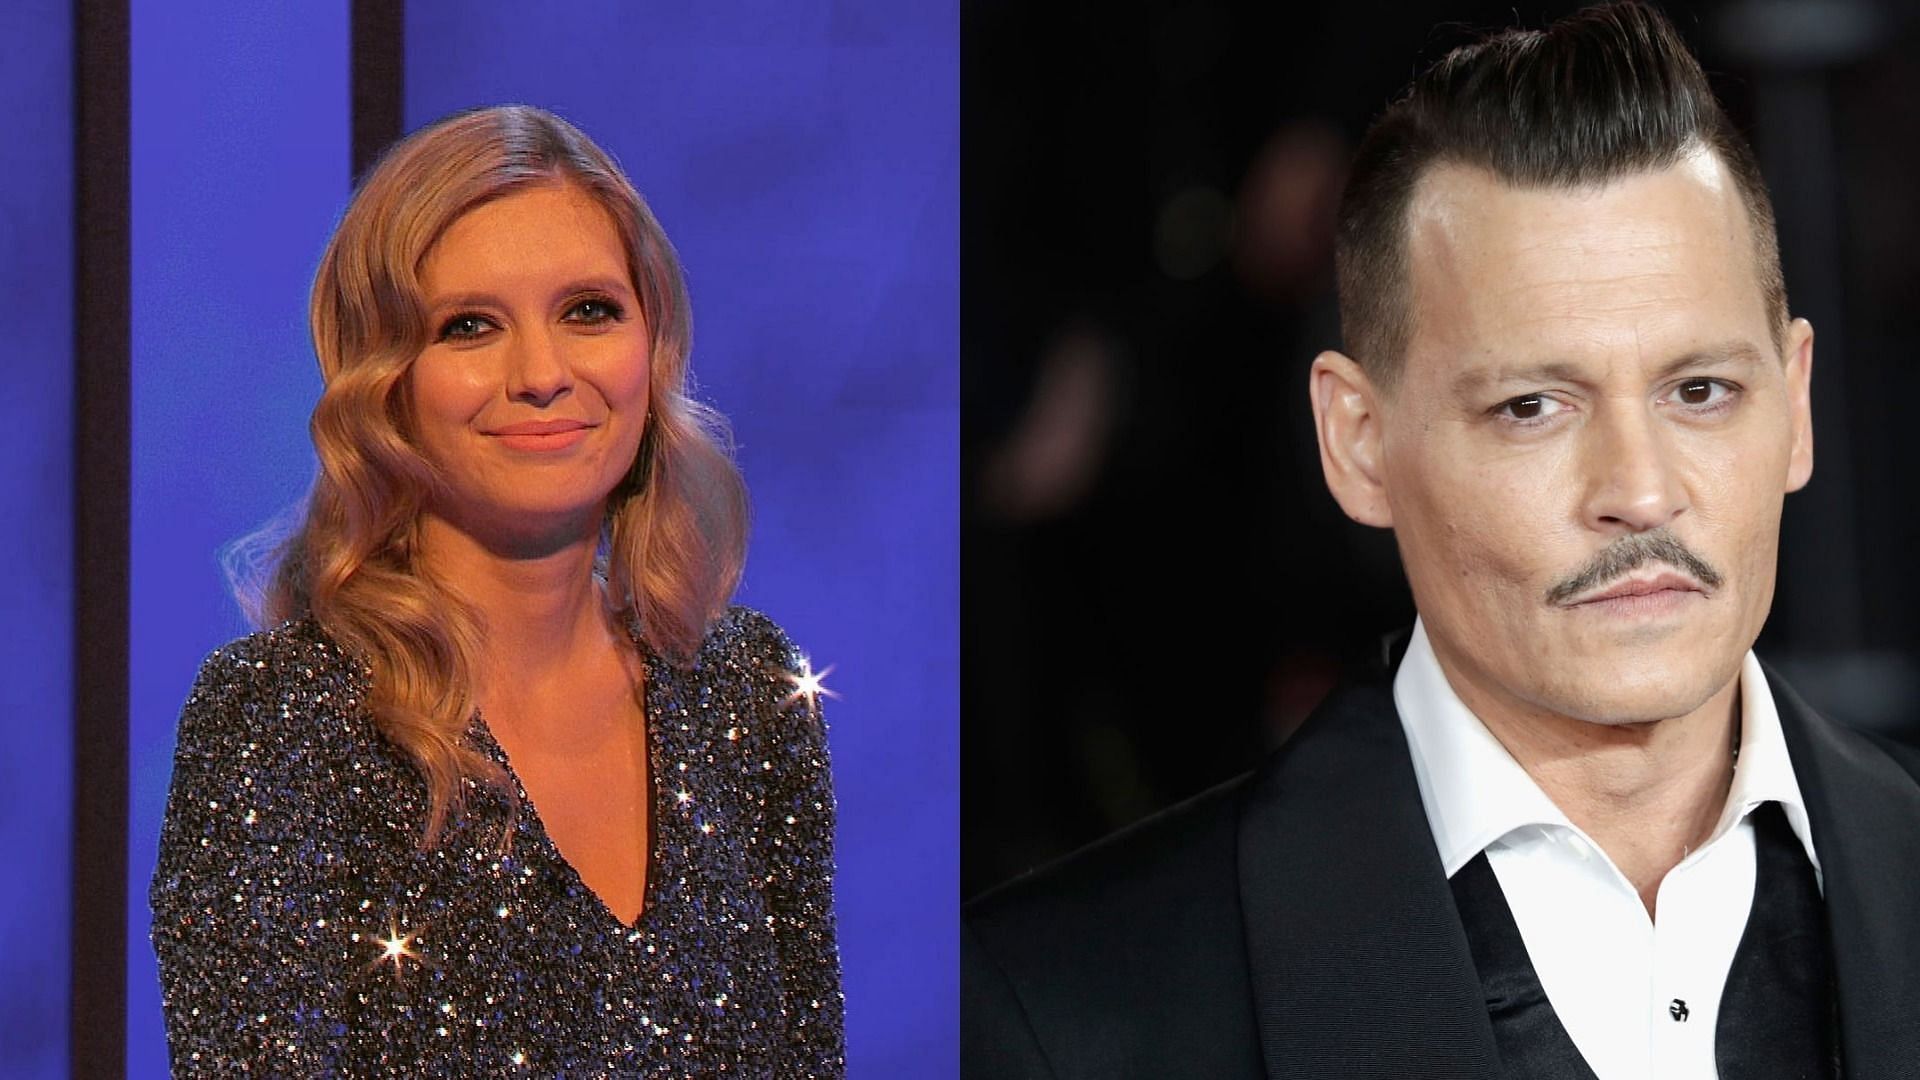 Countdown star Rachel Riley recently condemned Johnny Depp on Twitter (Image via rachelrileyrr/Instagram and Getty Images)